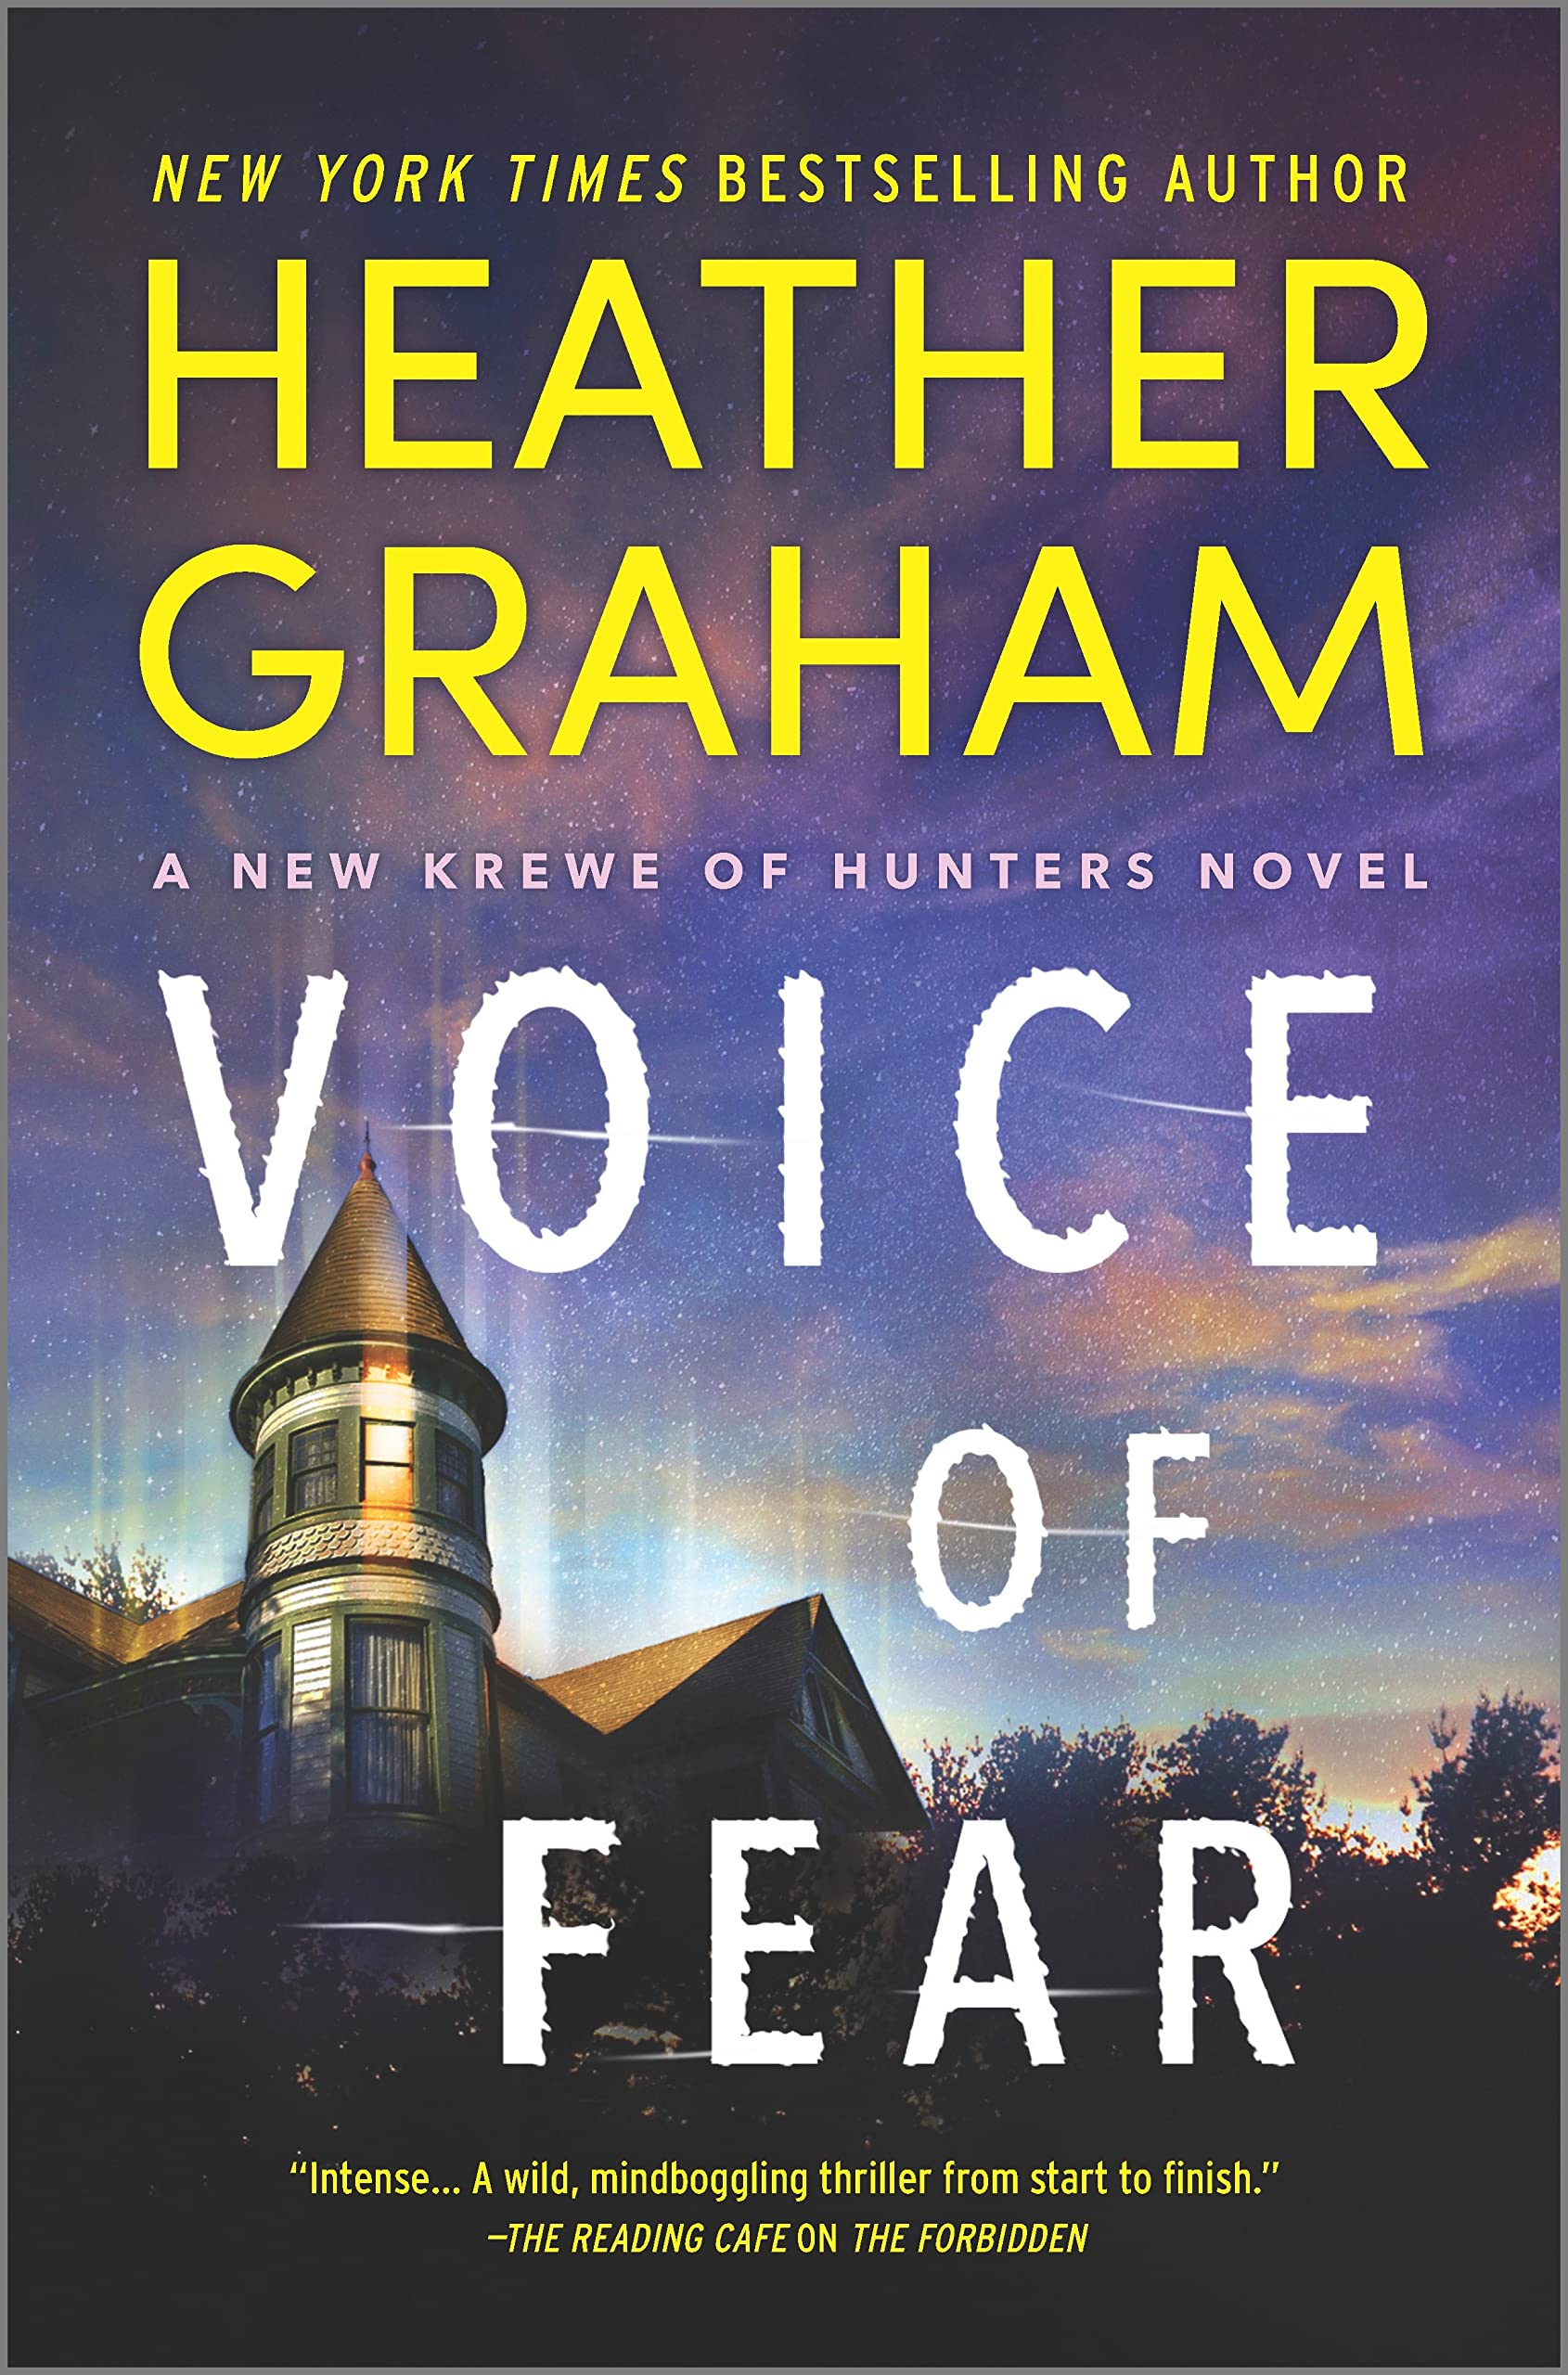 Image for "Voice of Fear"